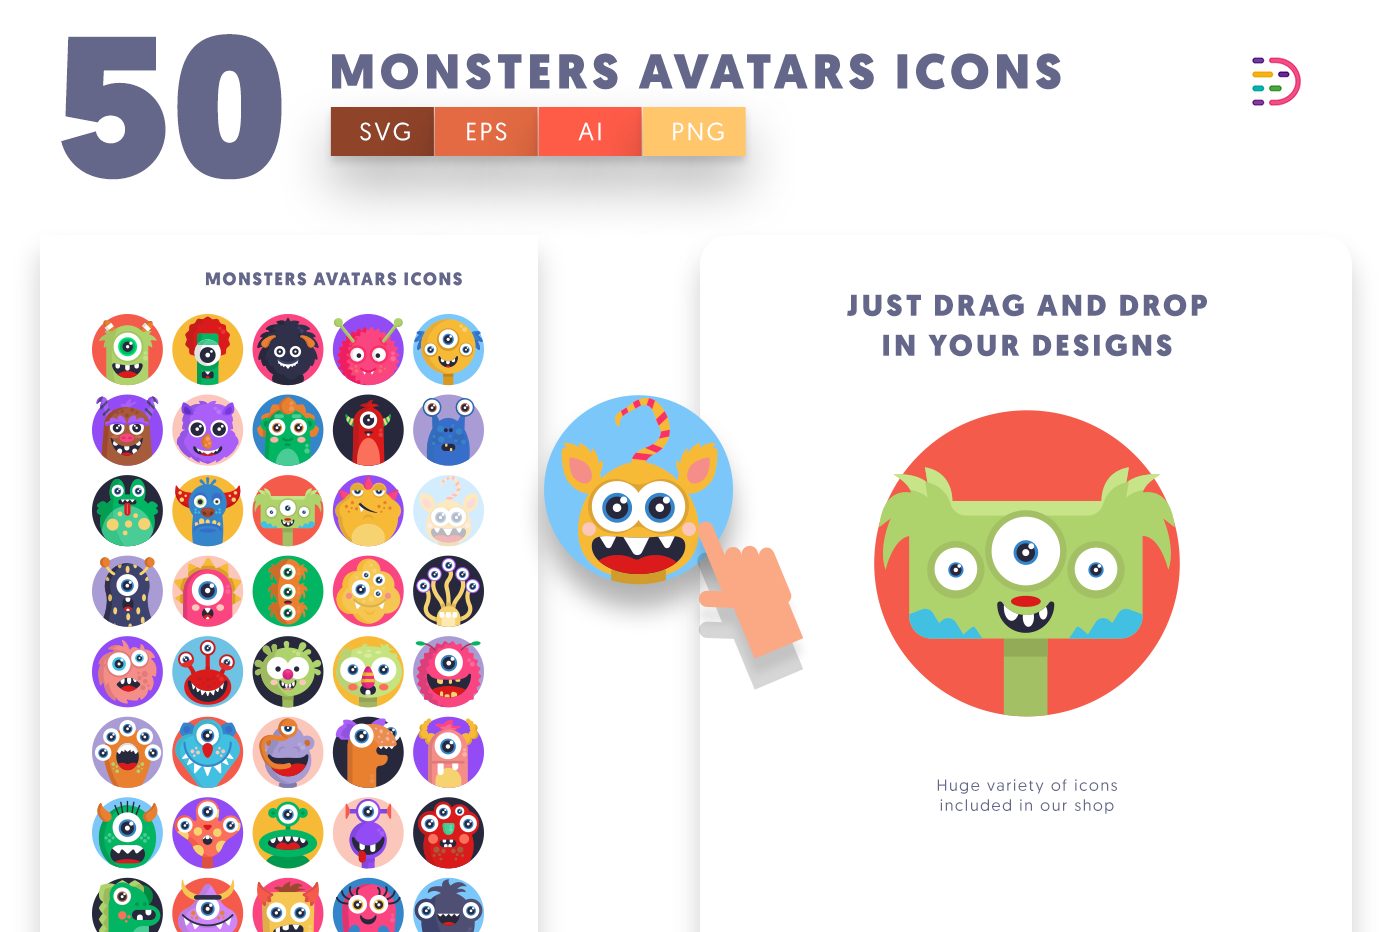 Drag and drop vector 50 Monsters Avatars Icons 